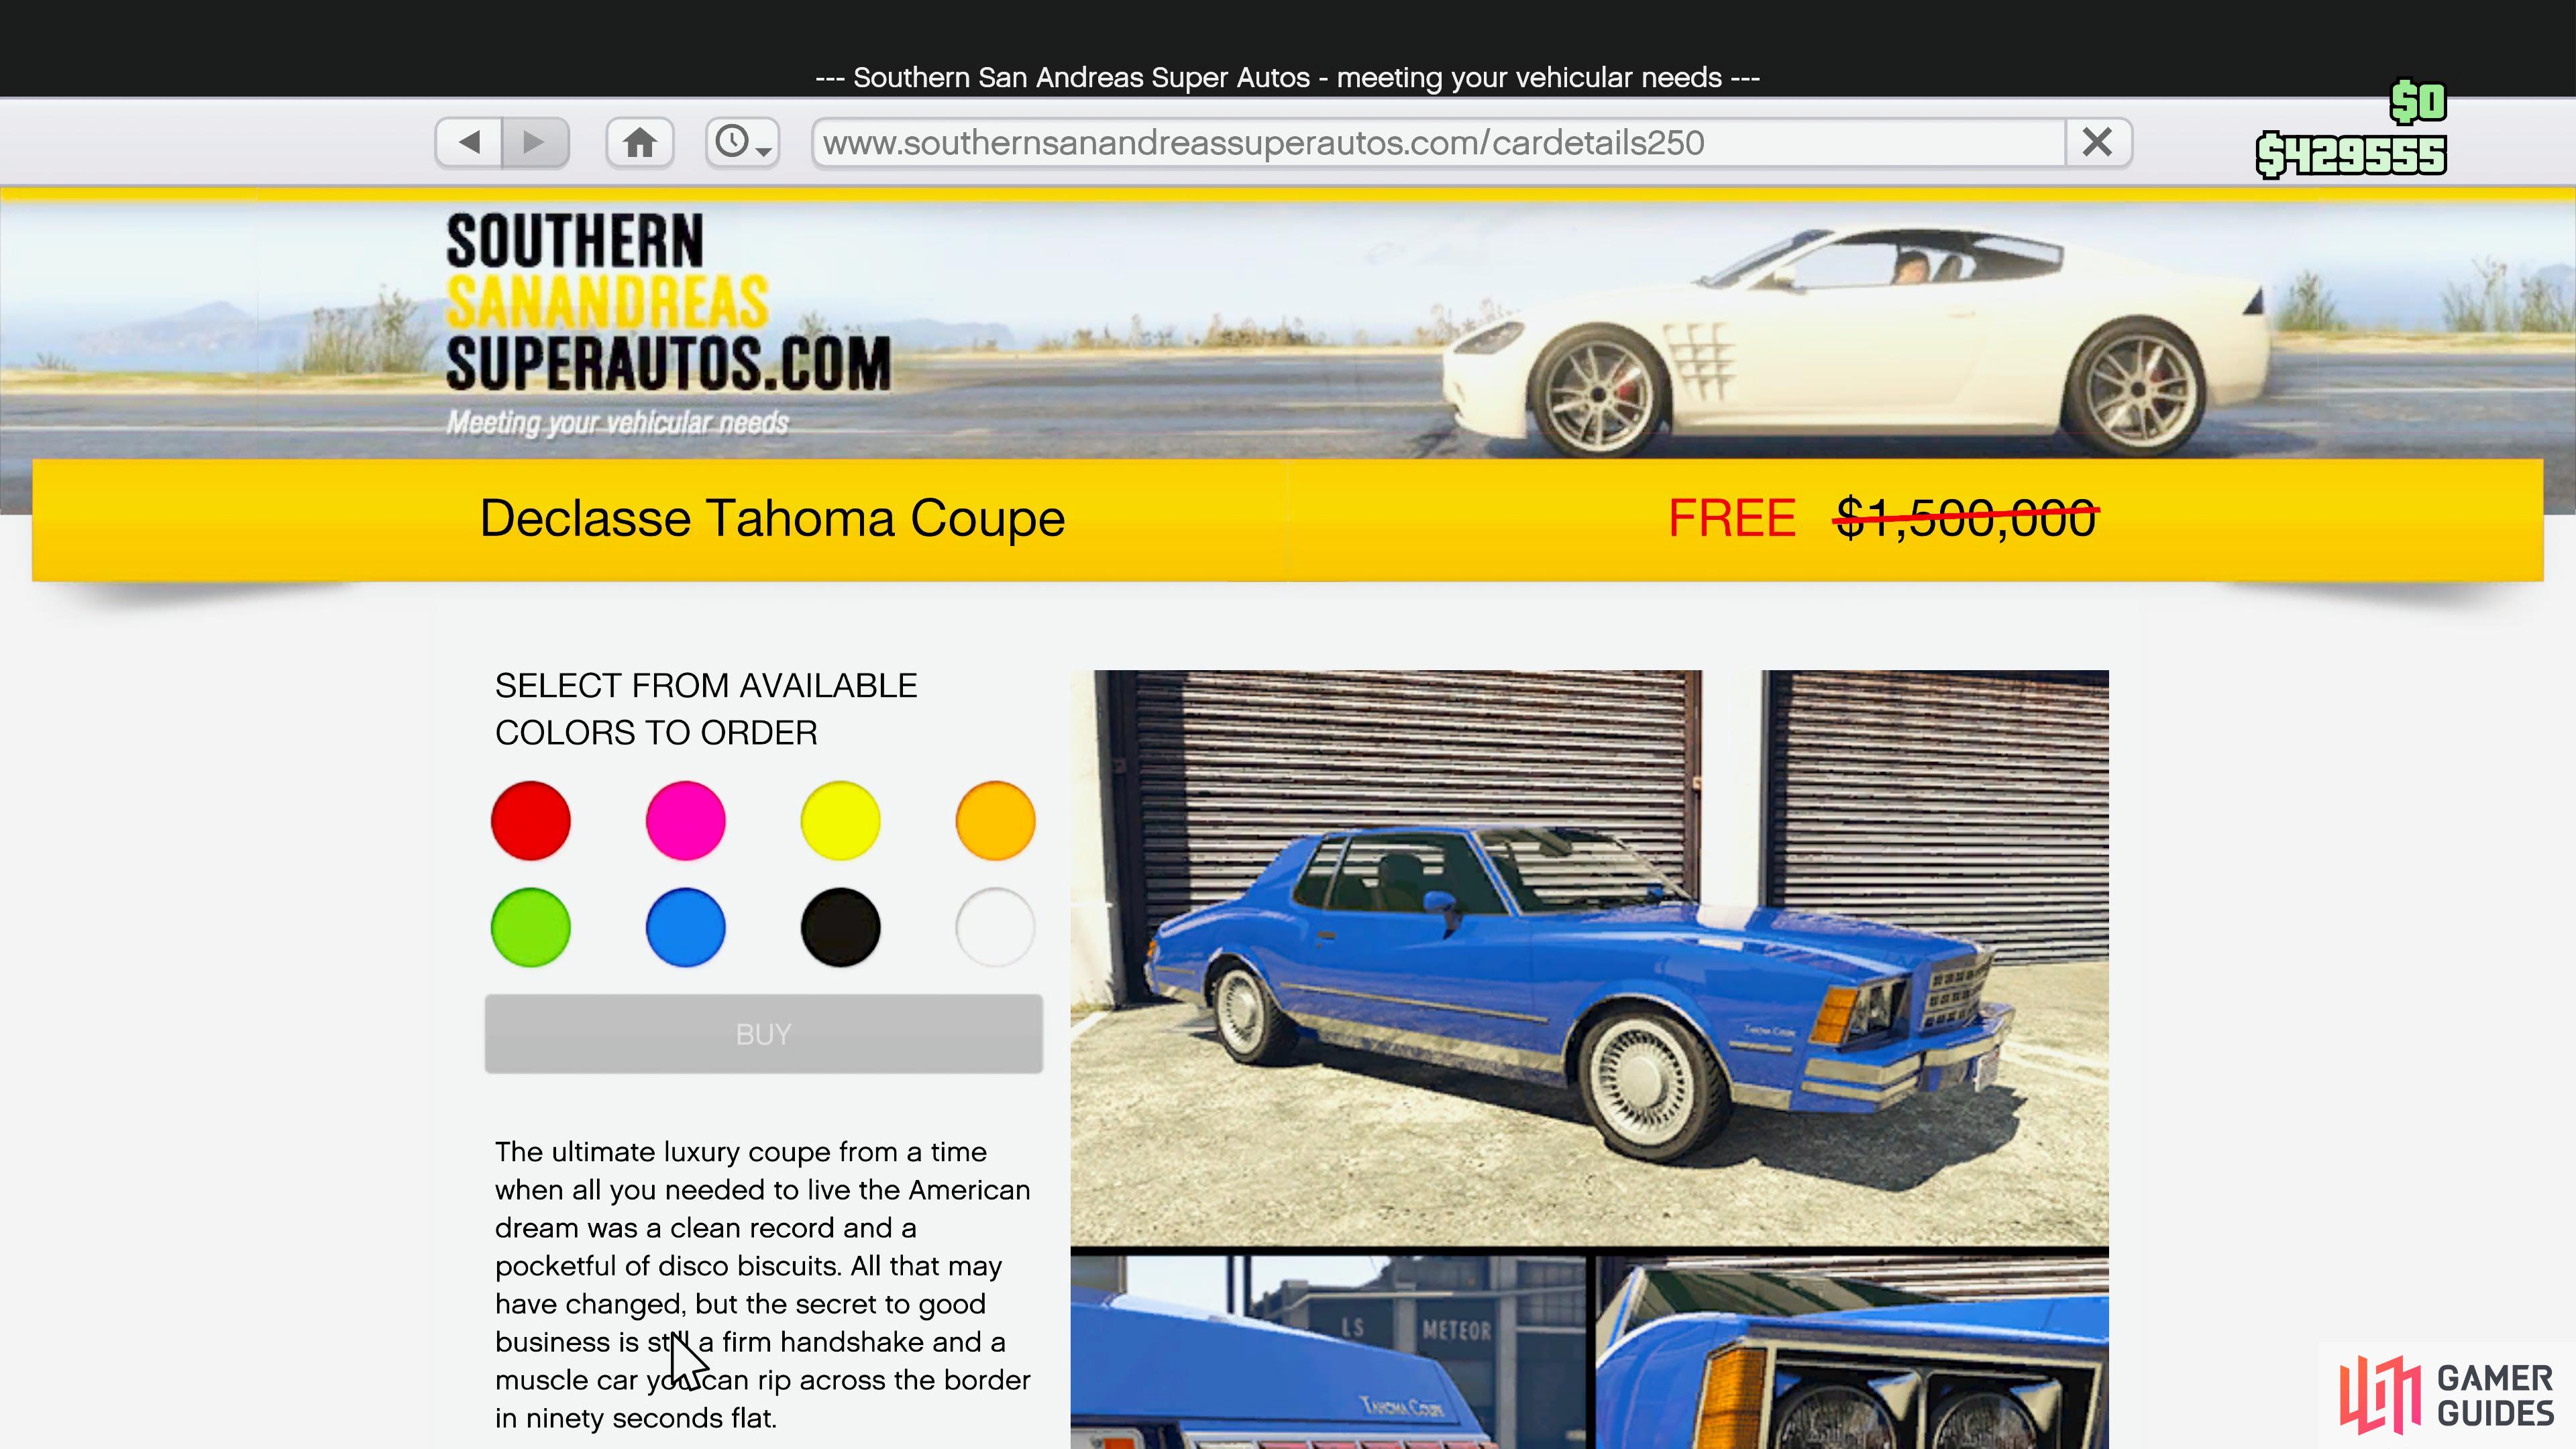 You can purchase the Declasse Tahome Coupe from the Southern San Andreas Super Auto.